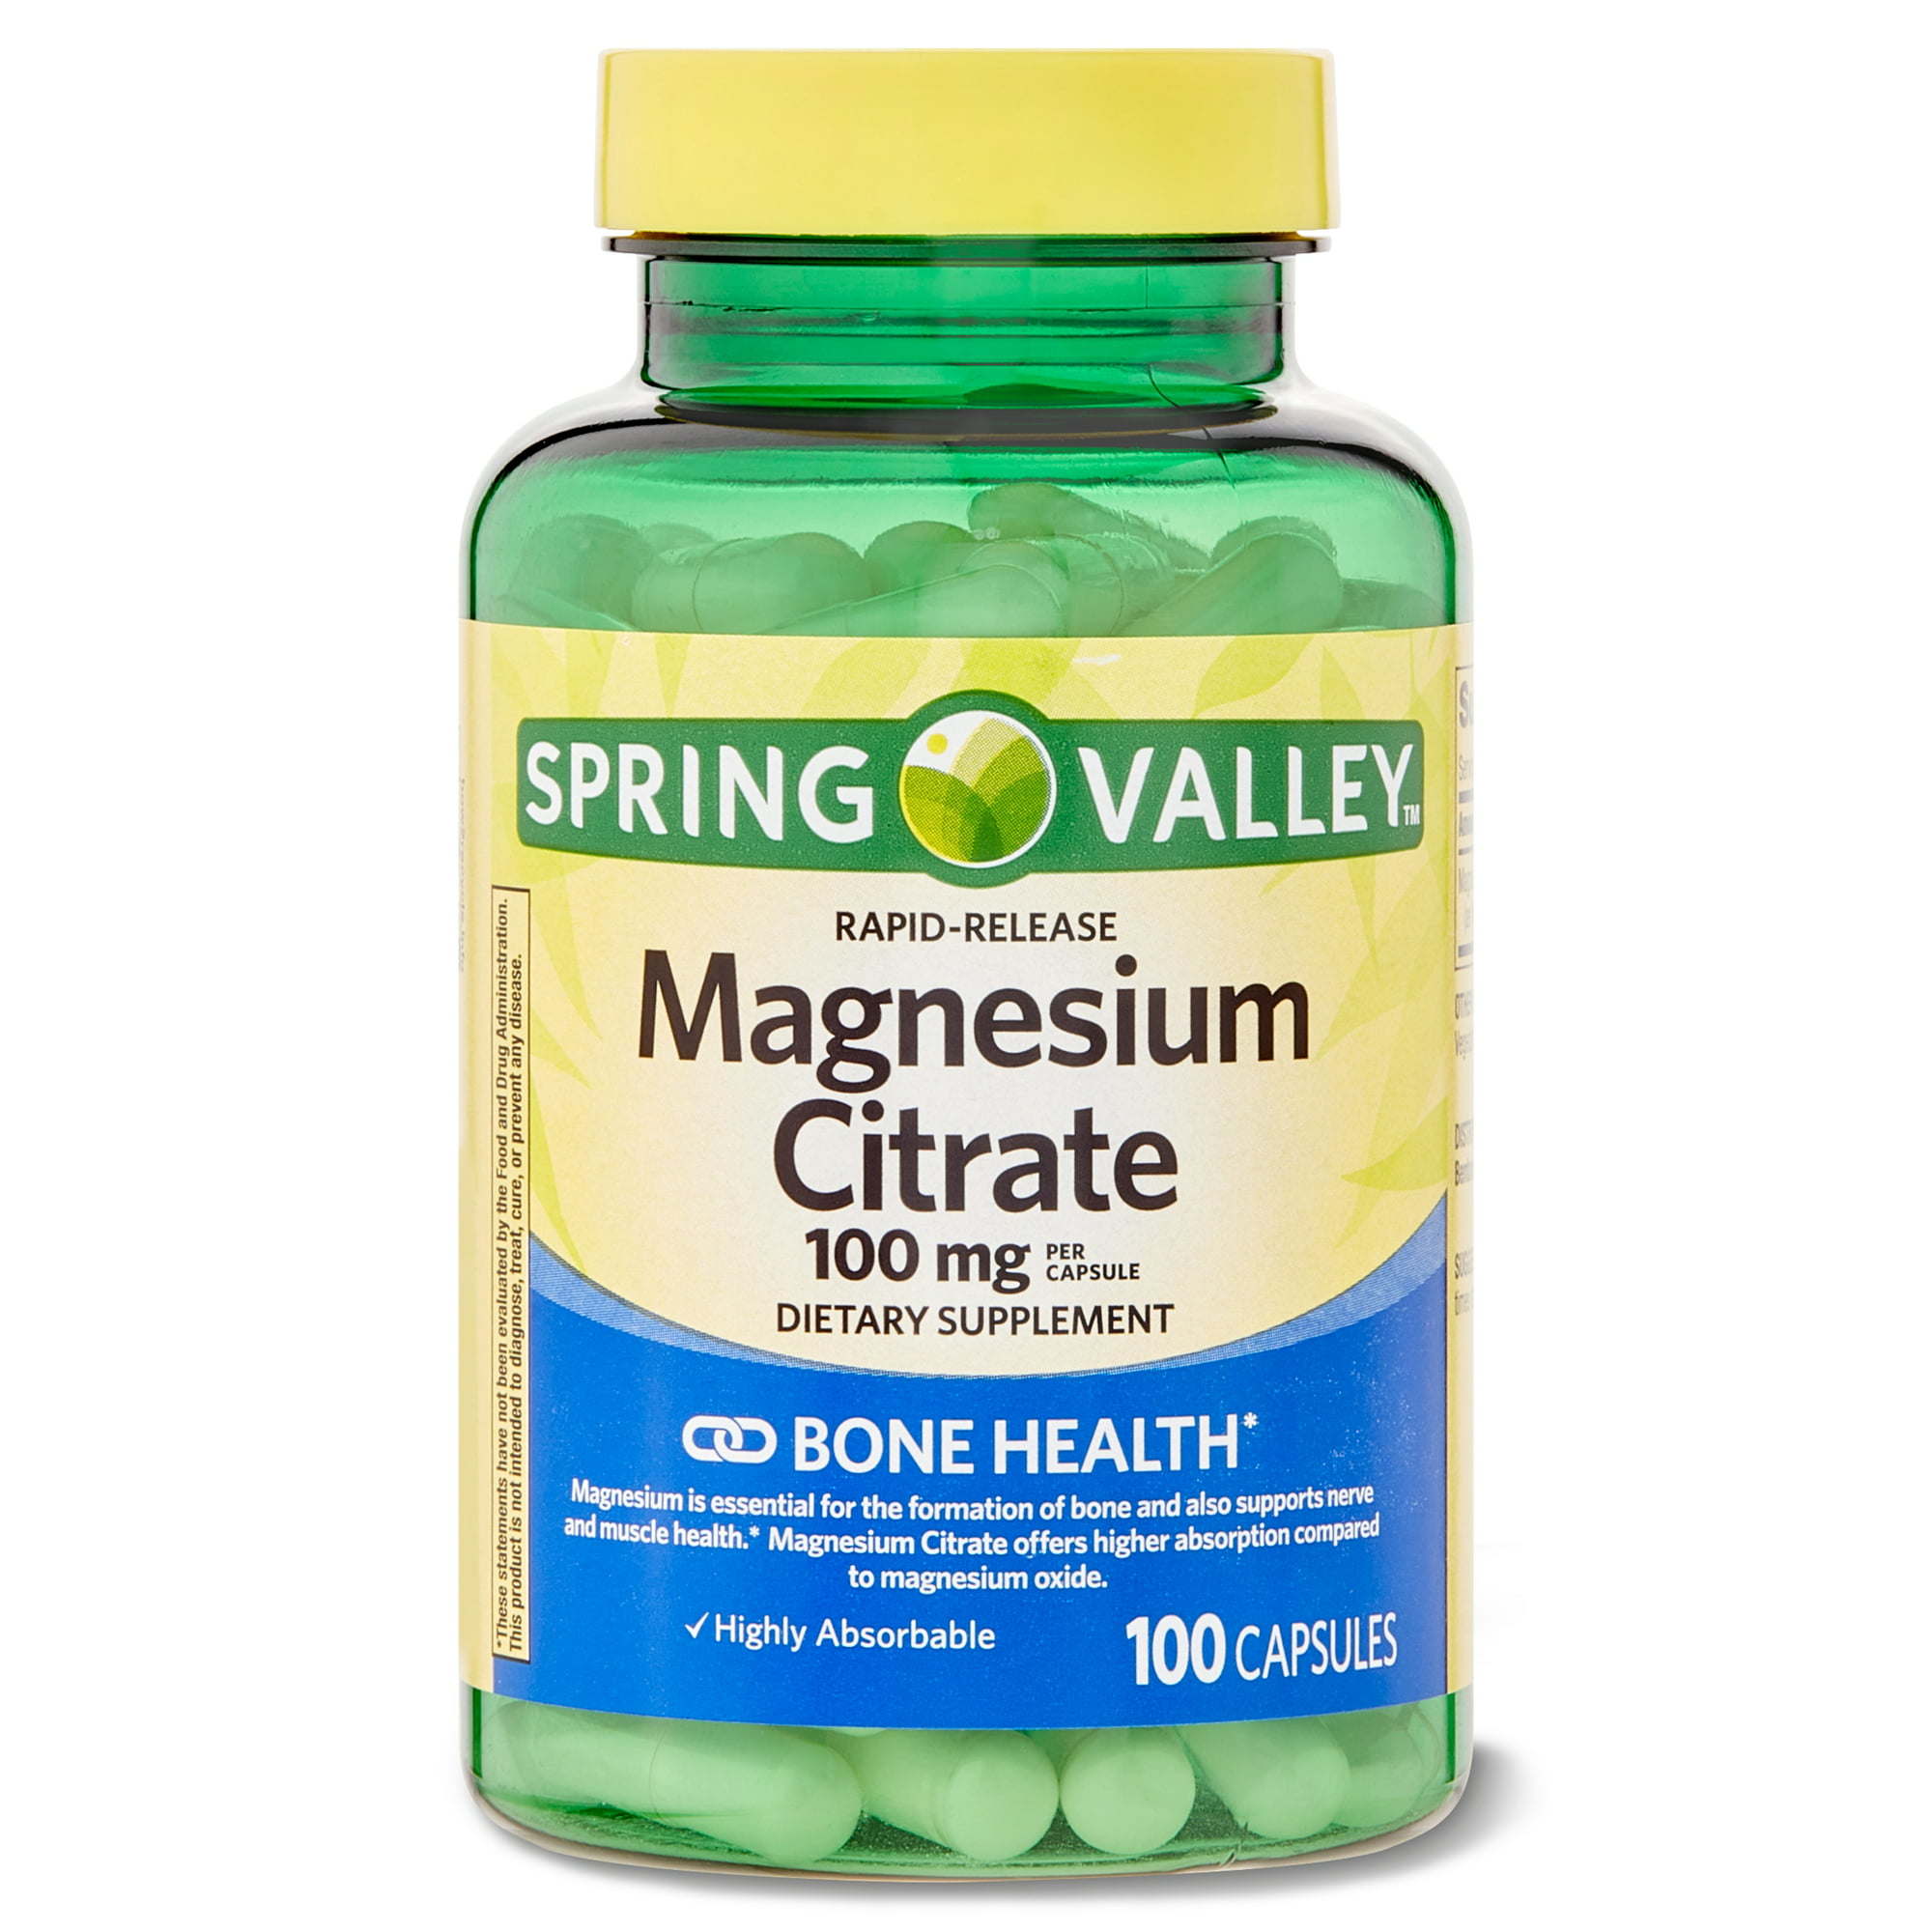 Spring Valley Rapid-Release Magnesium Citrate - Dietary Supplement, 100mg, 100 Count